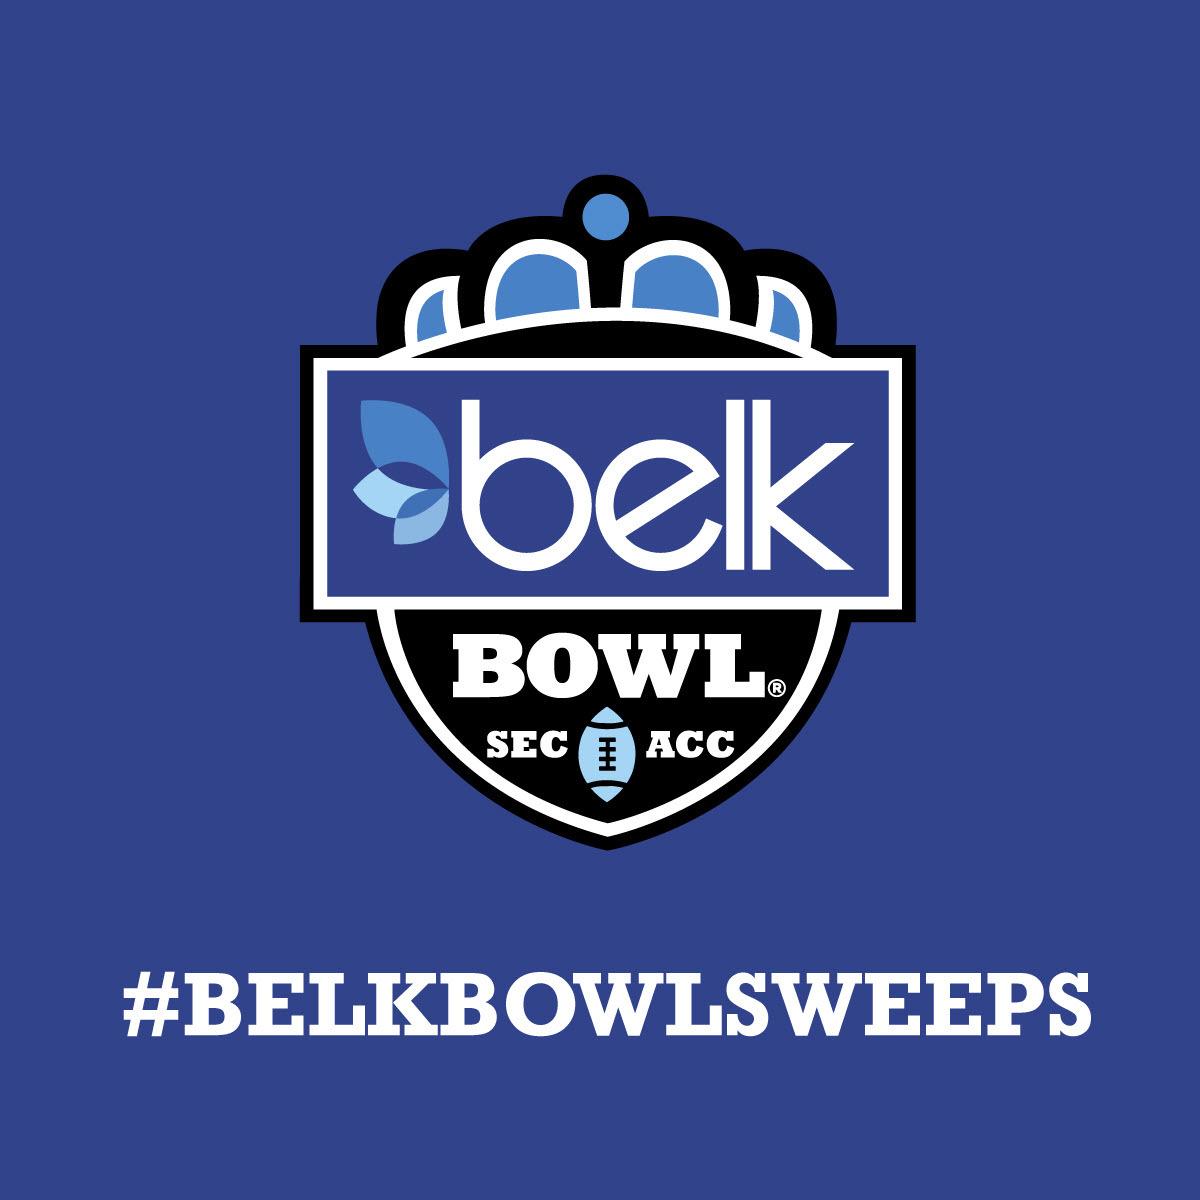 Belk On Twitter You Could Win A 1 000 Gift Card Belkbowlsweeps Enter Here Http T Co Igqgaay5qg Vbt8i5kxlv